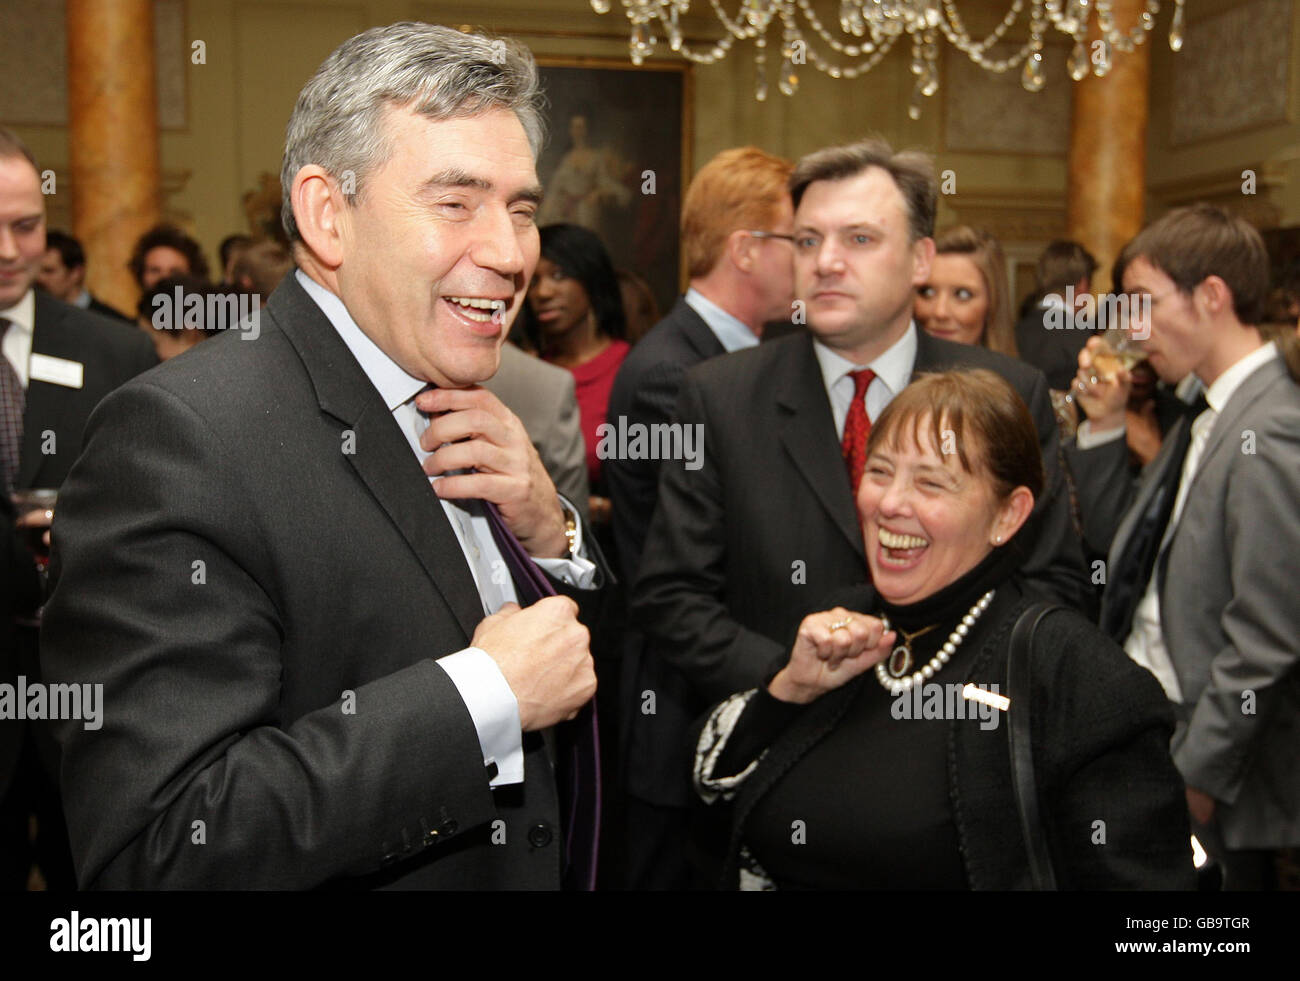 Prime Minister Gordon Brown speaks to Dame Julia Cleverdon, Chair of Teach First, at a reception for Teach First at Ten Downing Street, Westminster, London. Stock Photo